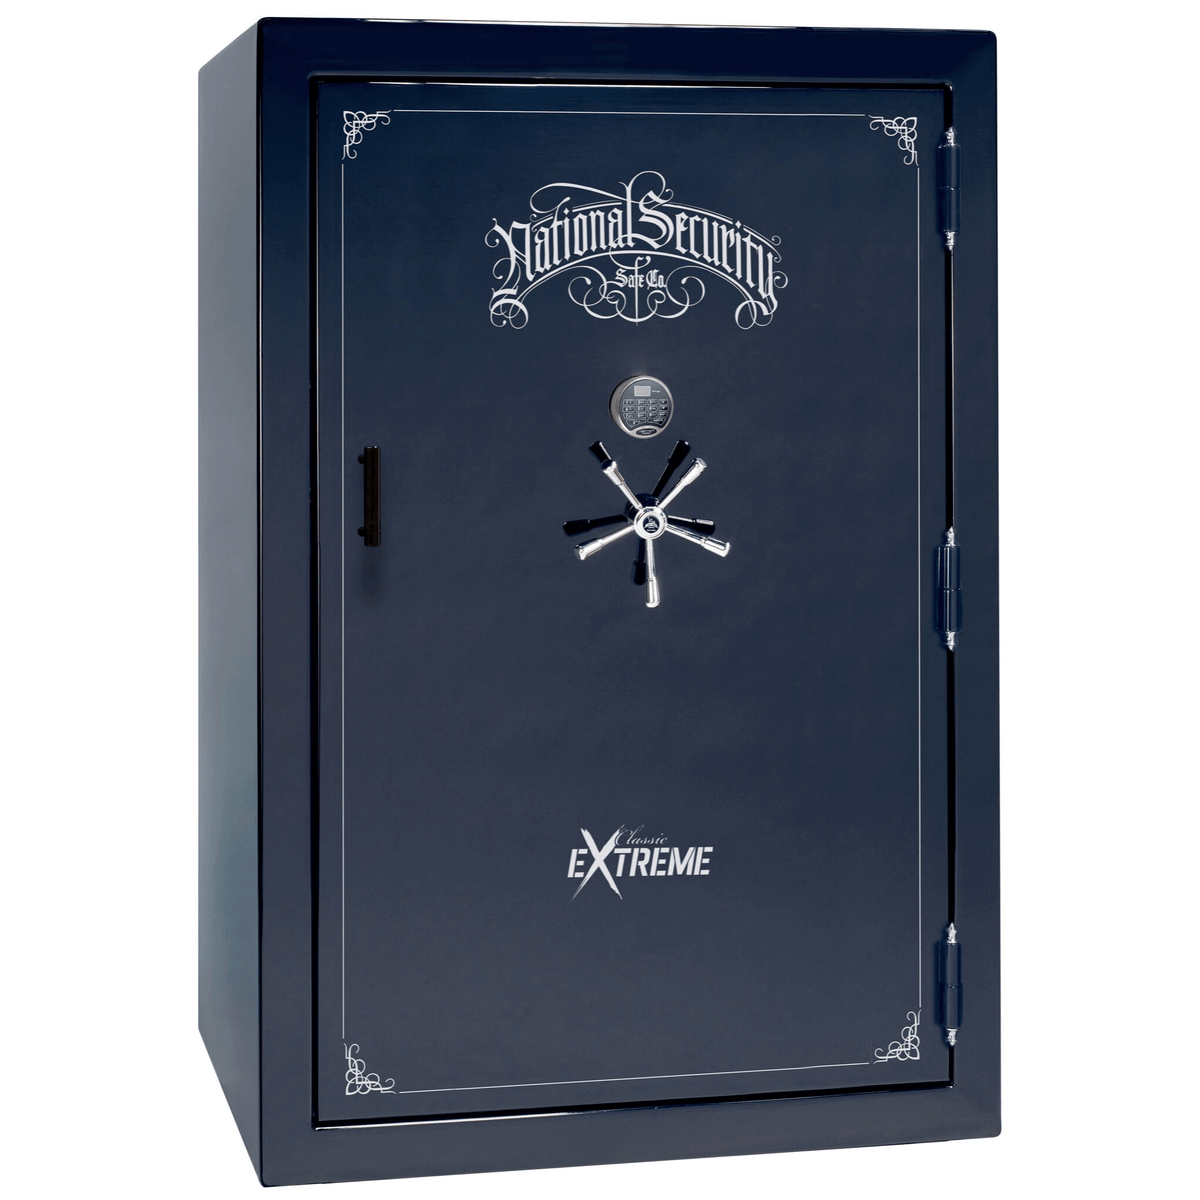 Liberty Classic Select Extreme Wide Body Safe in Blue Gloss with Chrome Electronic Lock.